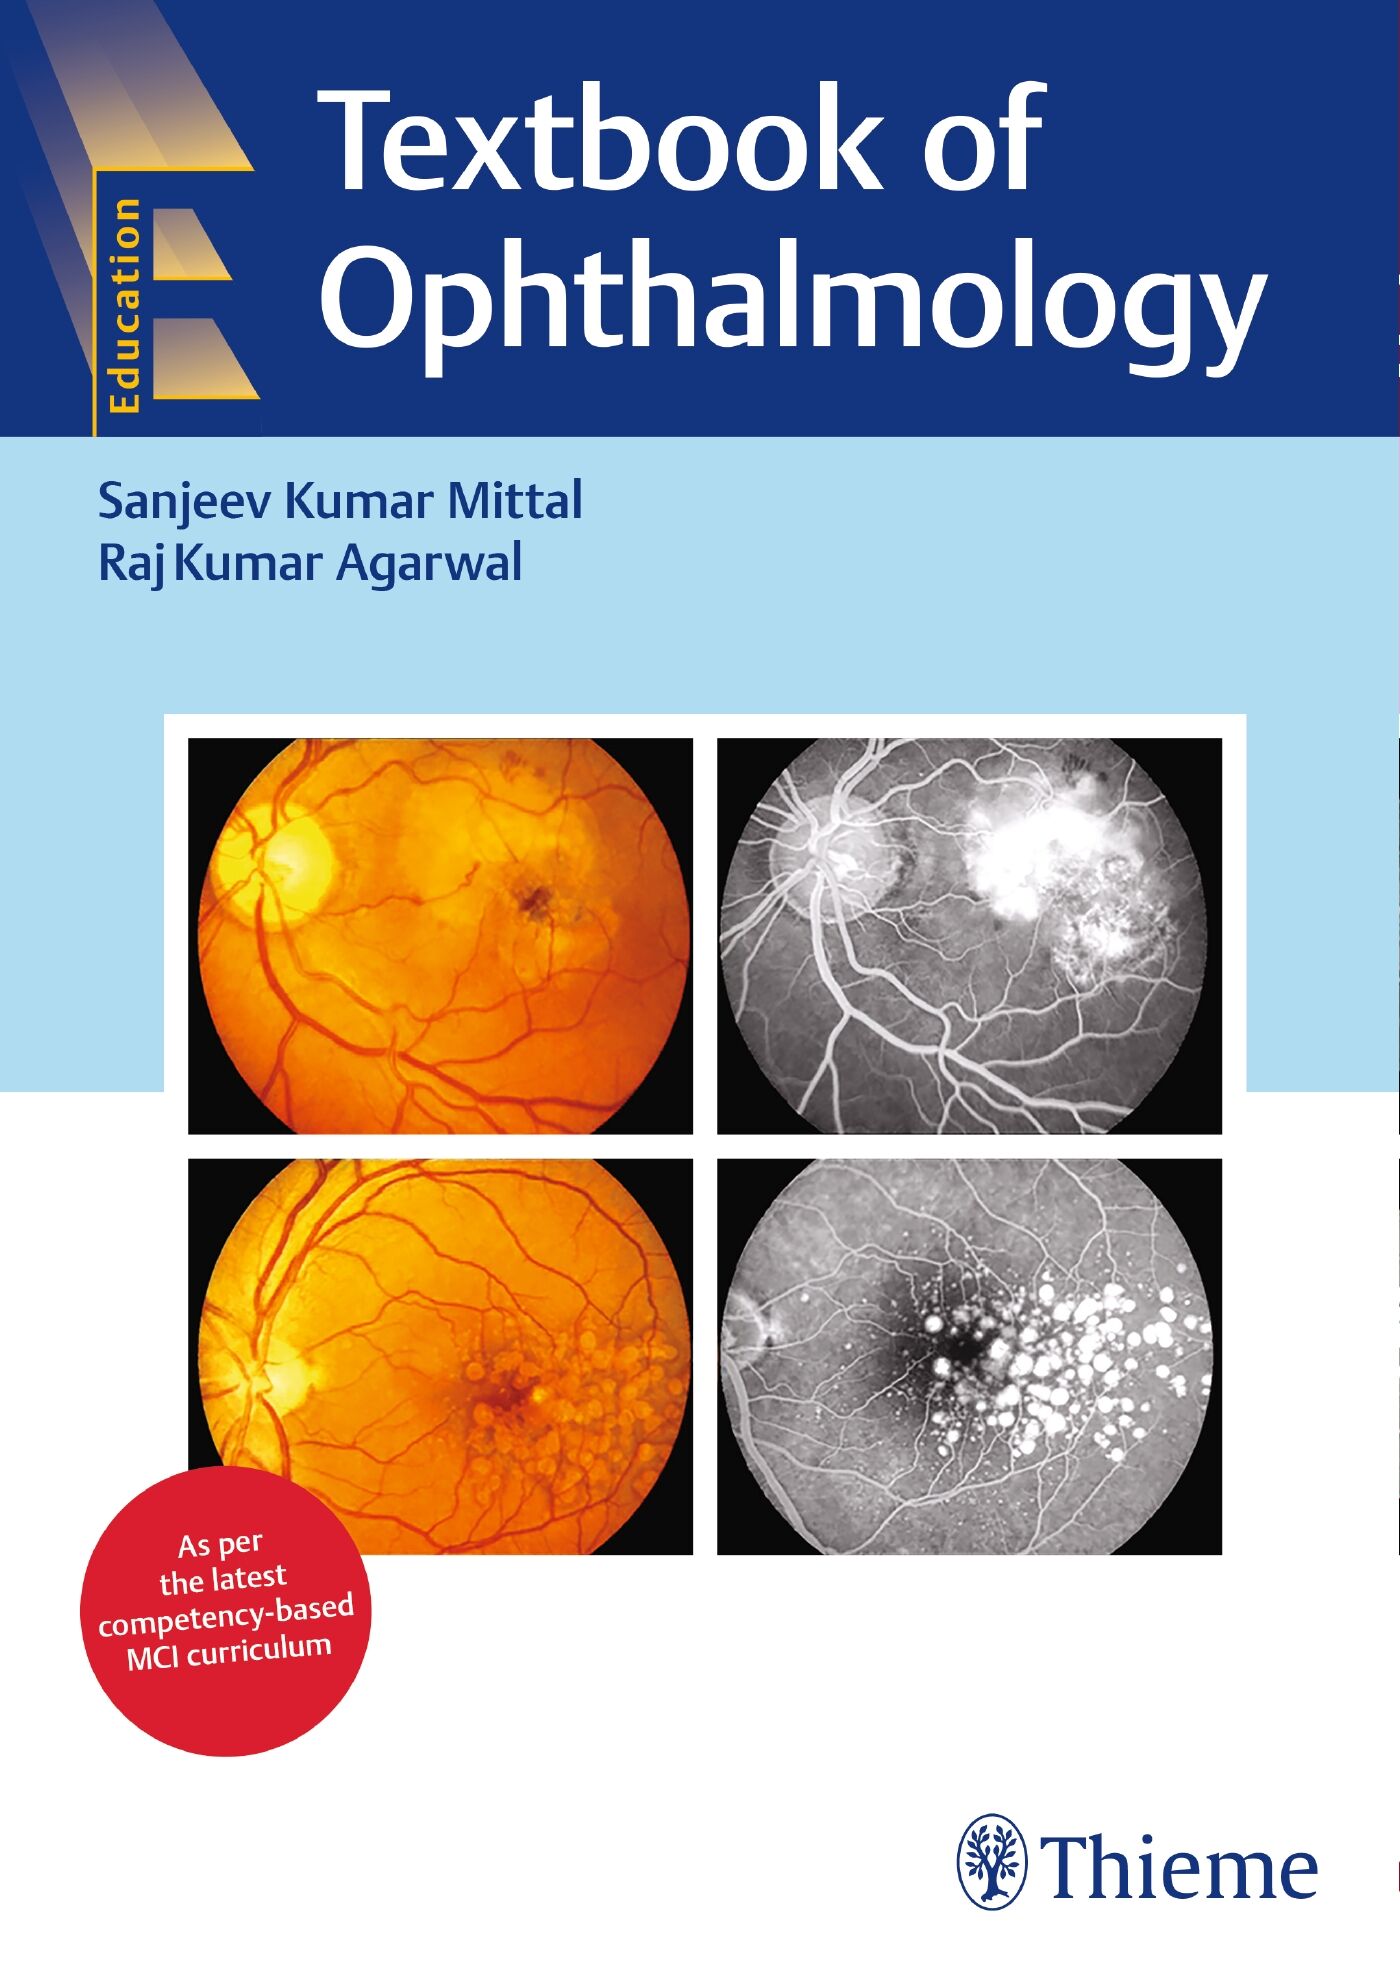 Textbook of Ophthalmology, 9789388257794